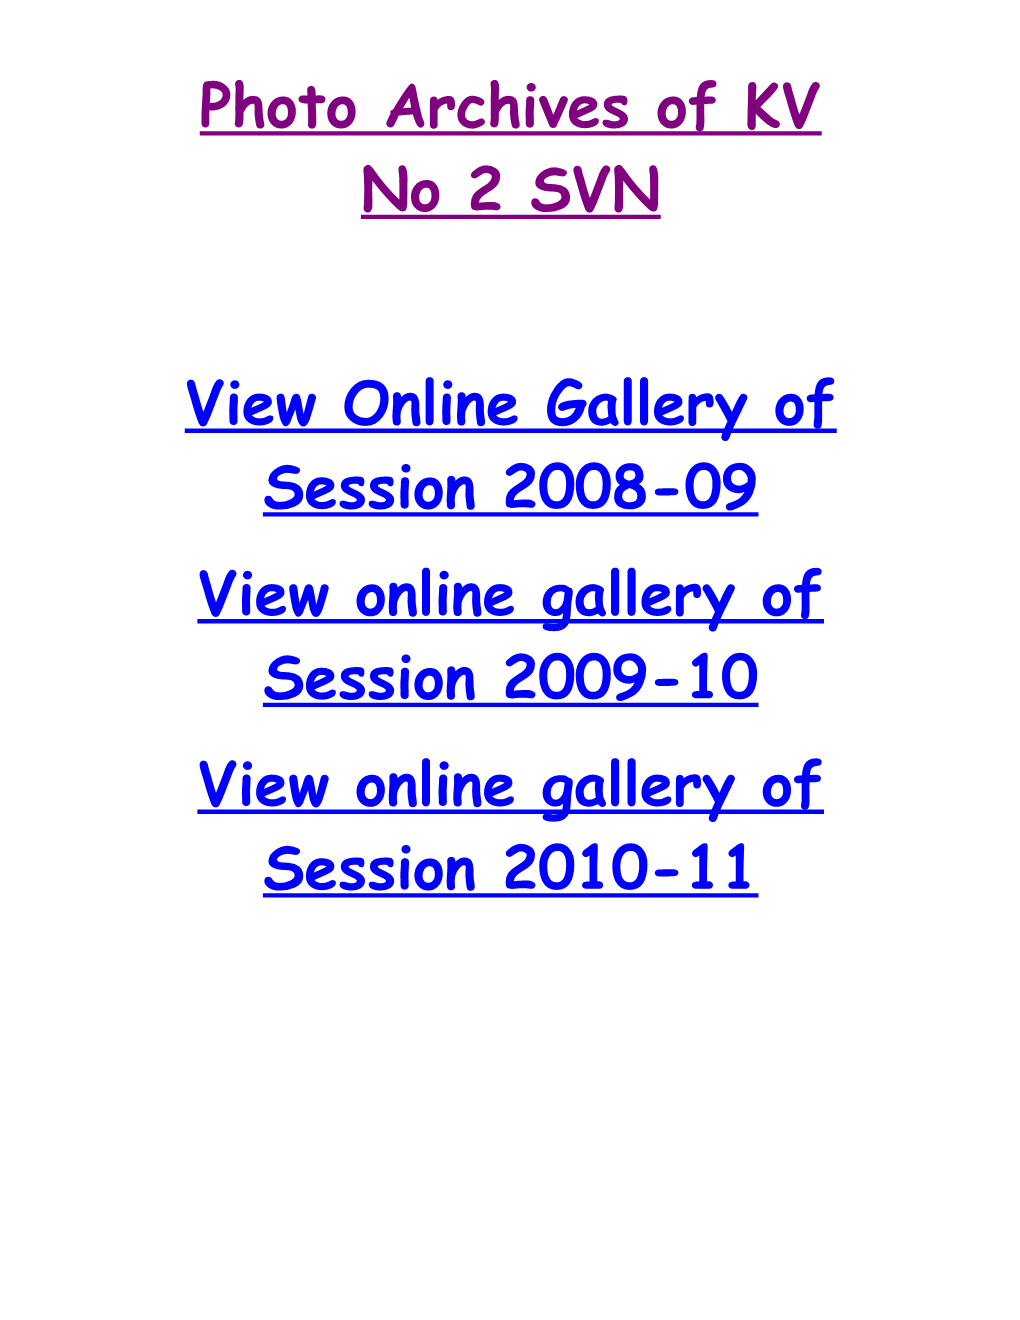 View Online Gallery of Session 2008-09